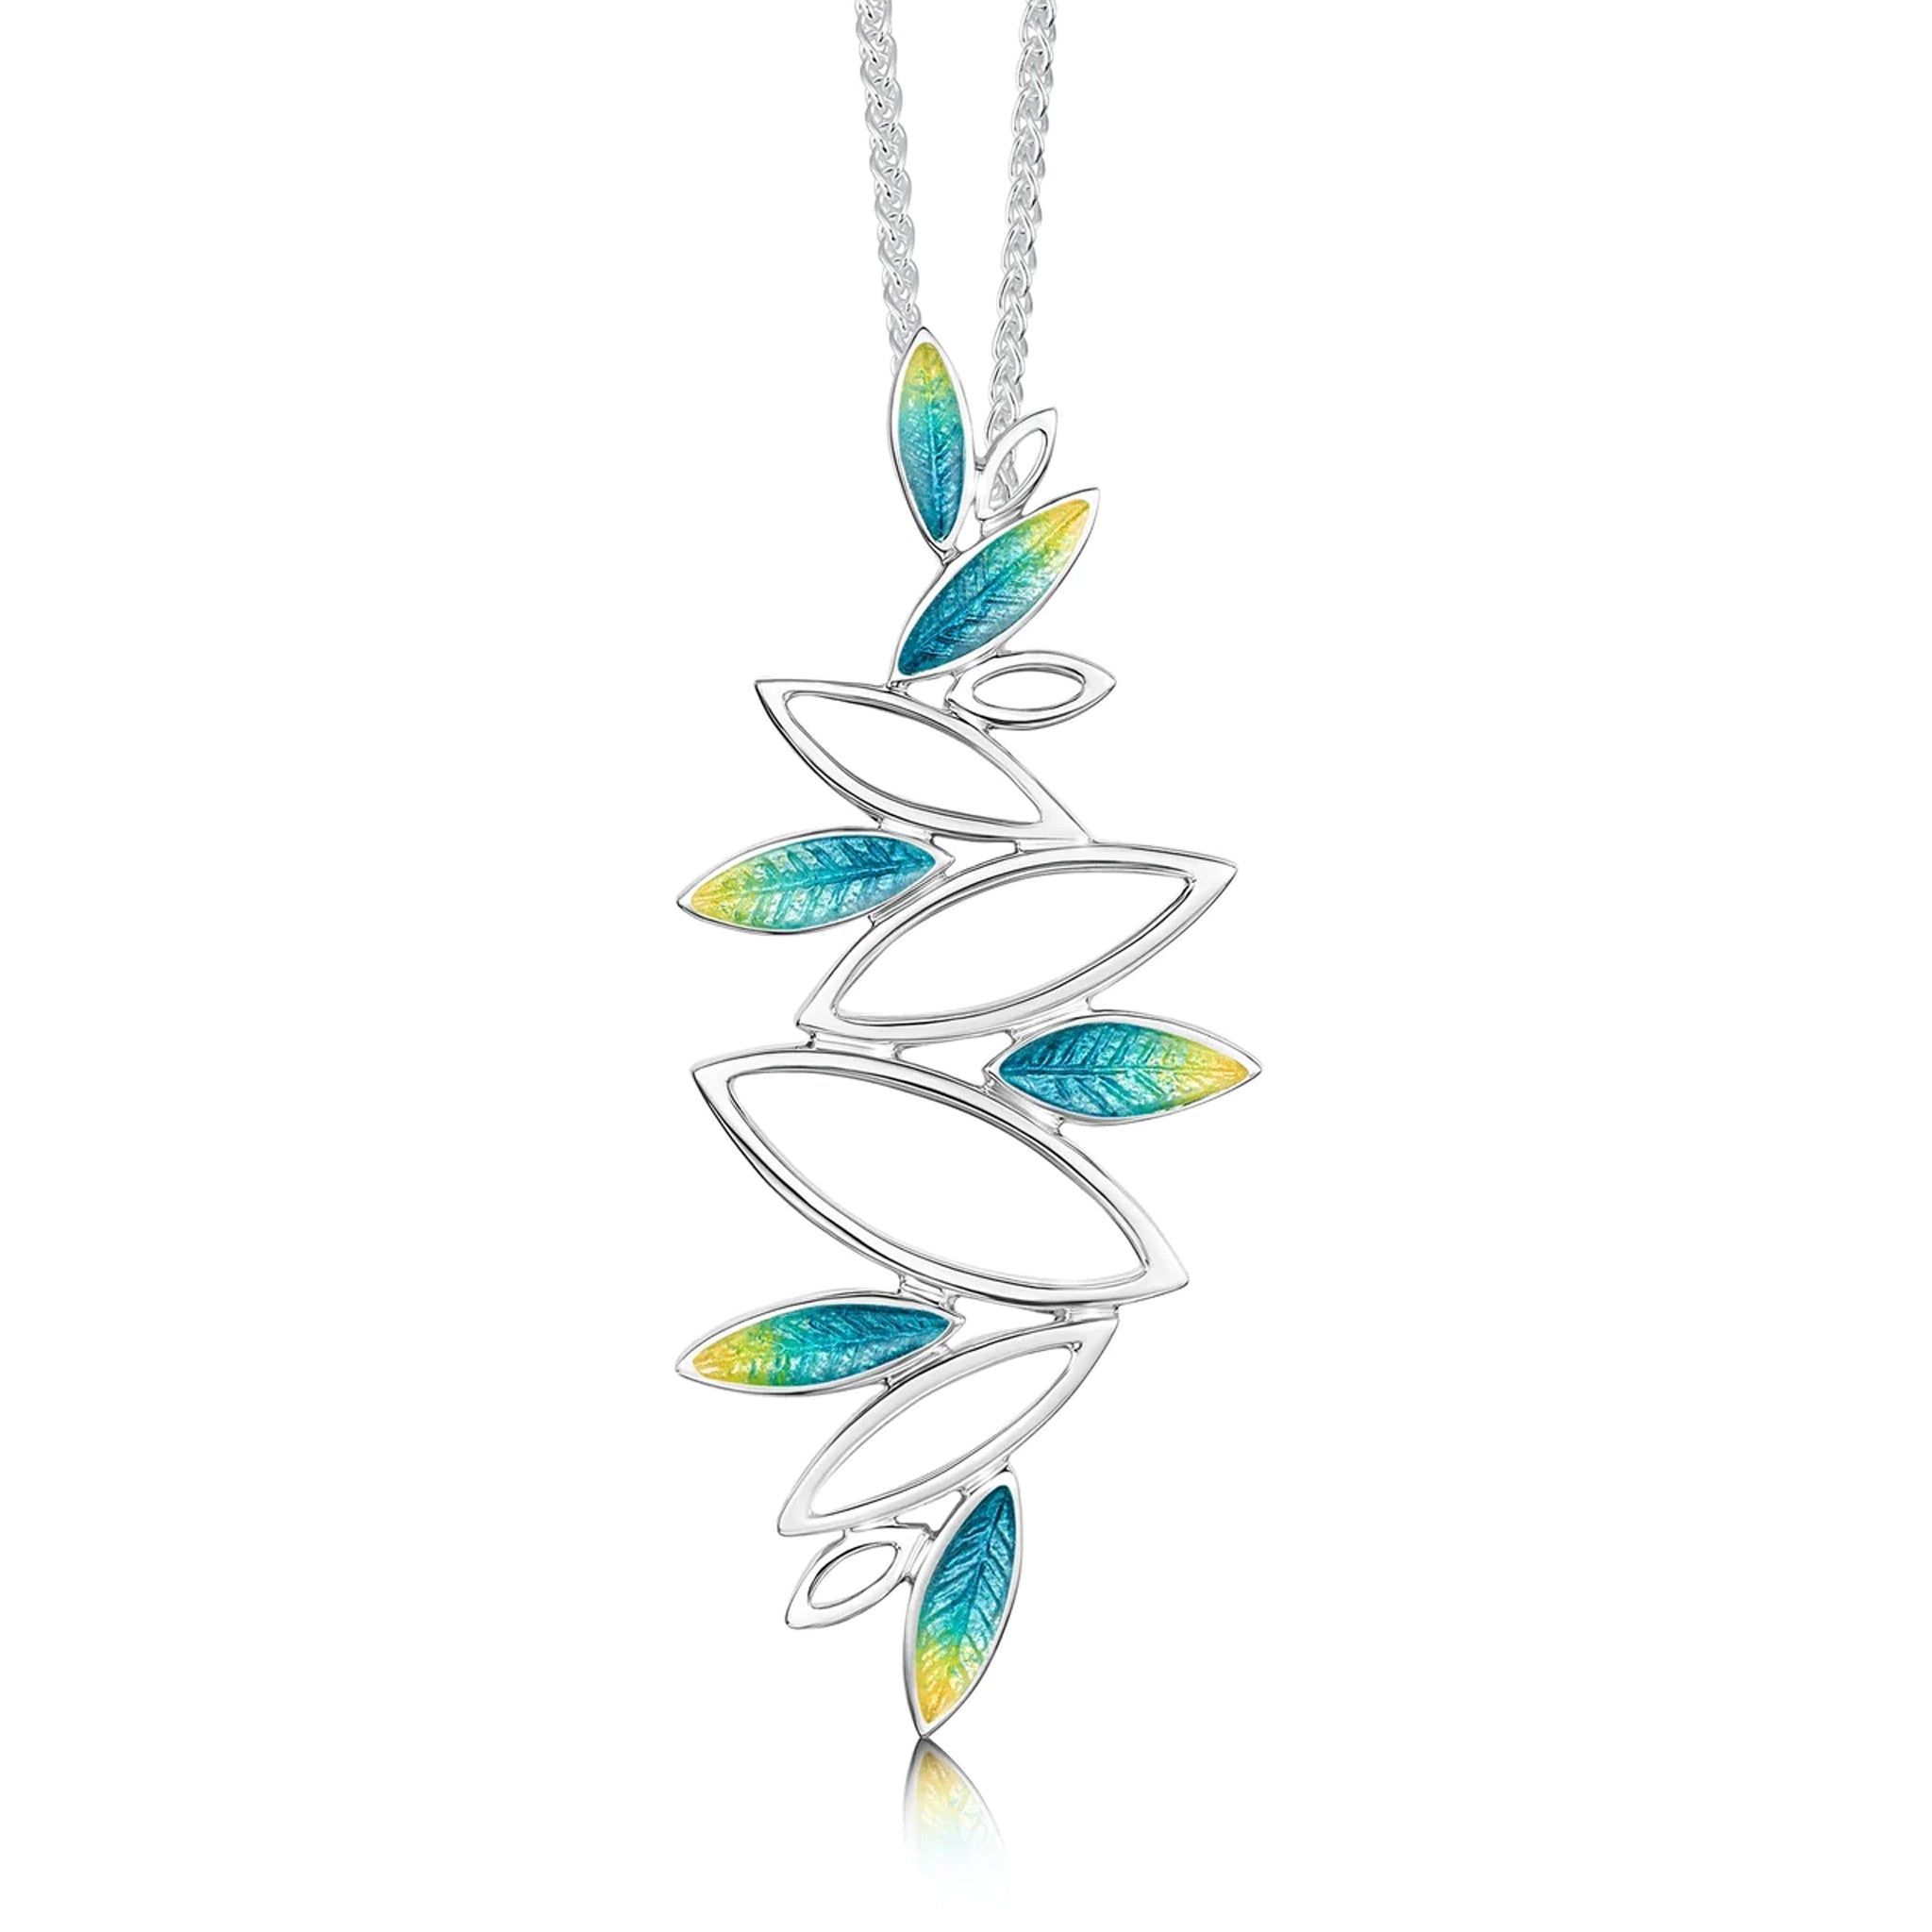 Silver large pendant in varying size leaf shapes in blue/green/yellow enamel and silver on silver chain